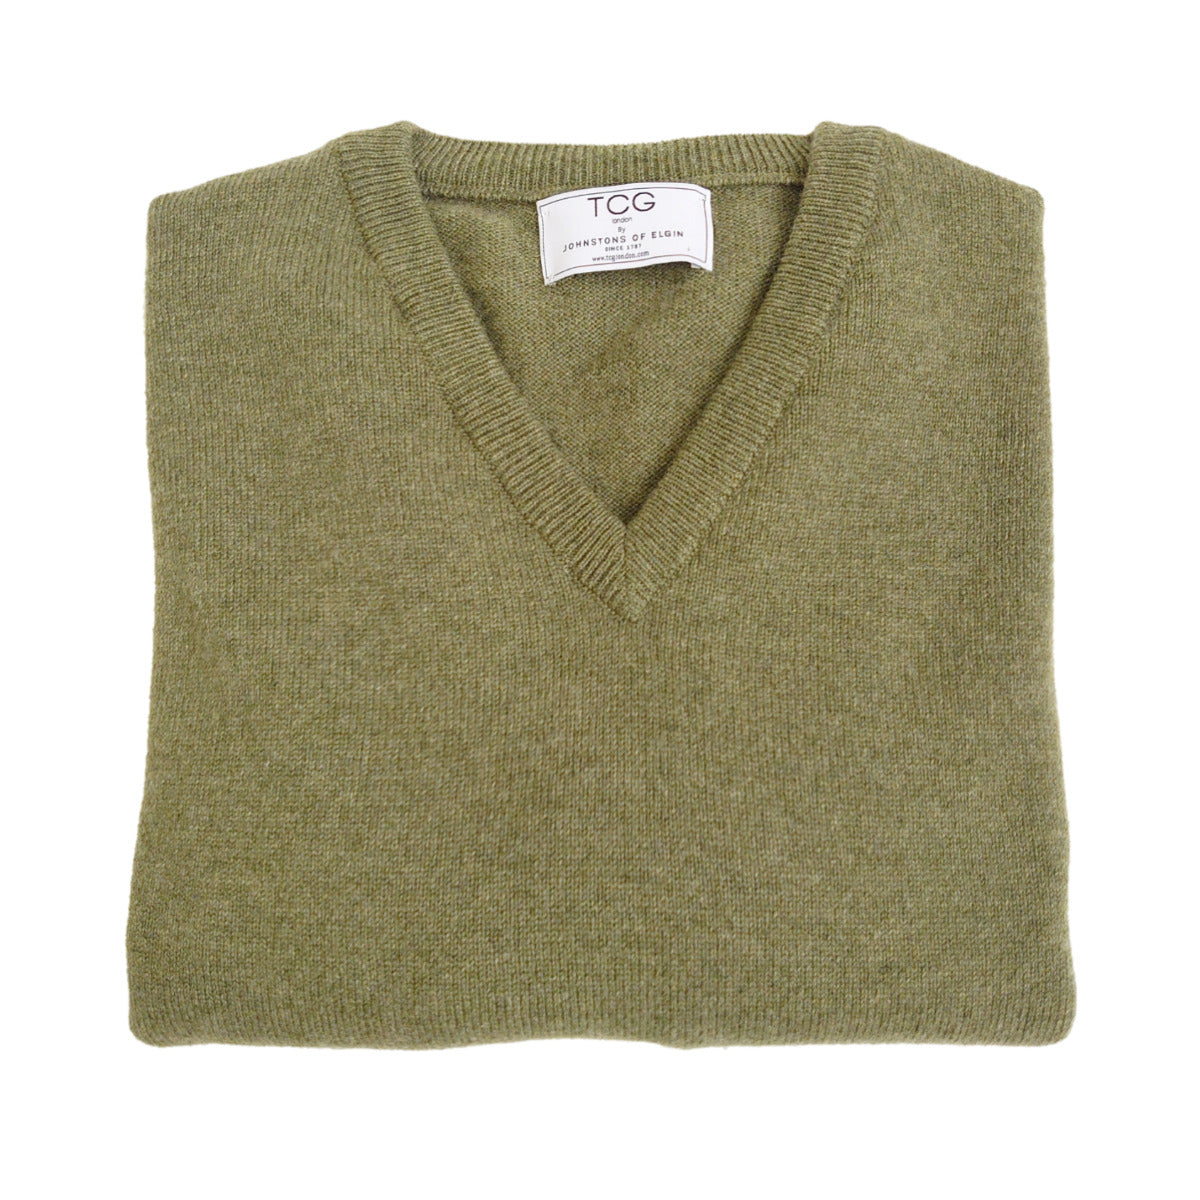 Men's Relaxed Fit V-Neck 100% Pure Cashmere Jumper - Loden Green - S